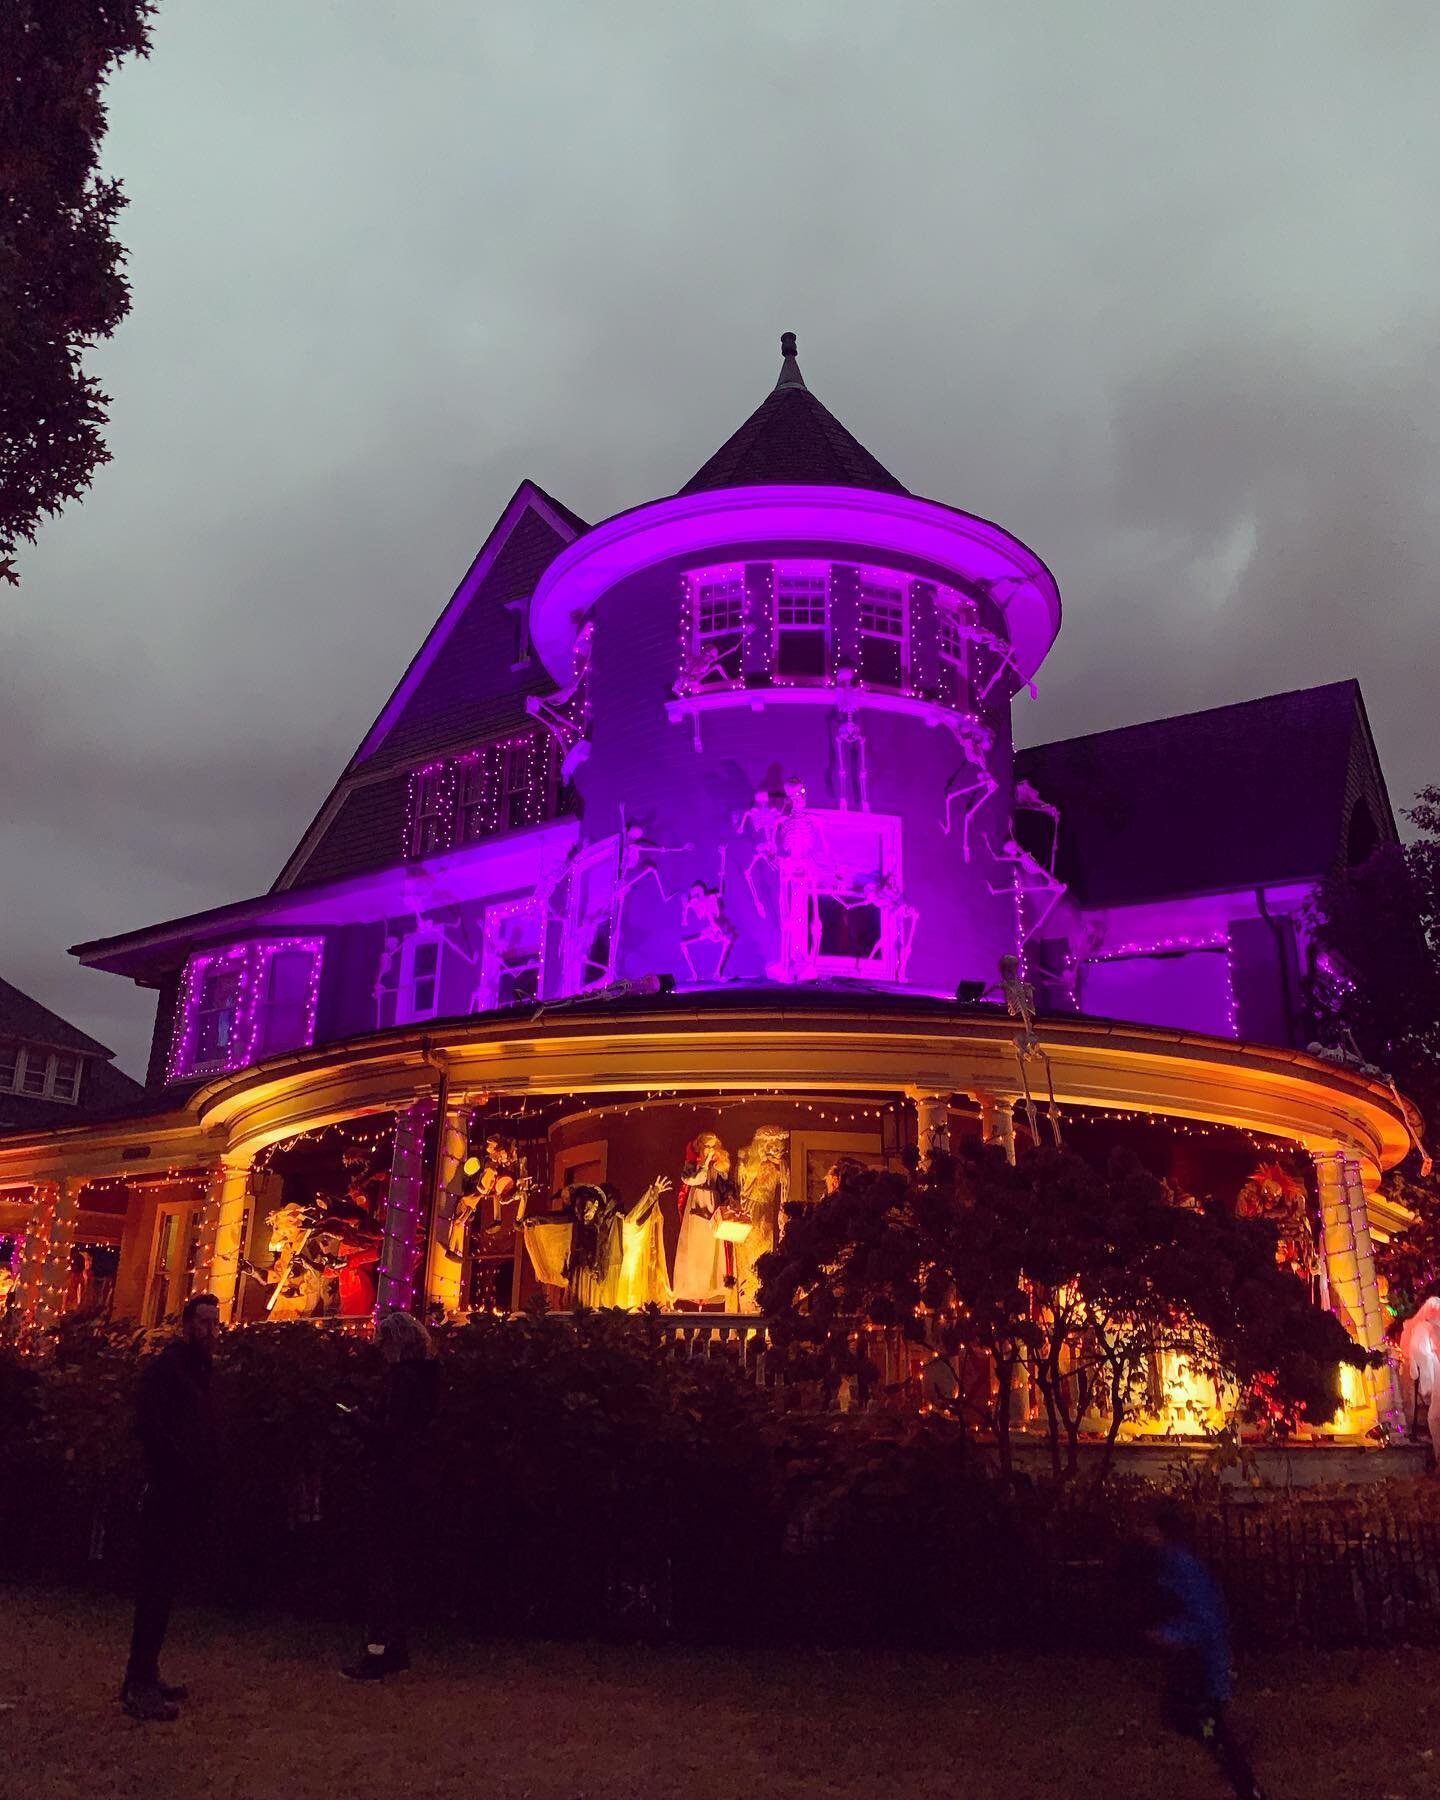 In the spirit of this weekend&rsquo;s festivities, I thought I&rsquo;d give you all a walking tour of my neighborhood&rsquo;s famous &ldquo;Halloween House&rdquo; (owned by Pulitzer Prize-winning playwright, David Lindsay-Abaire). This year&rsquo;s h